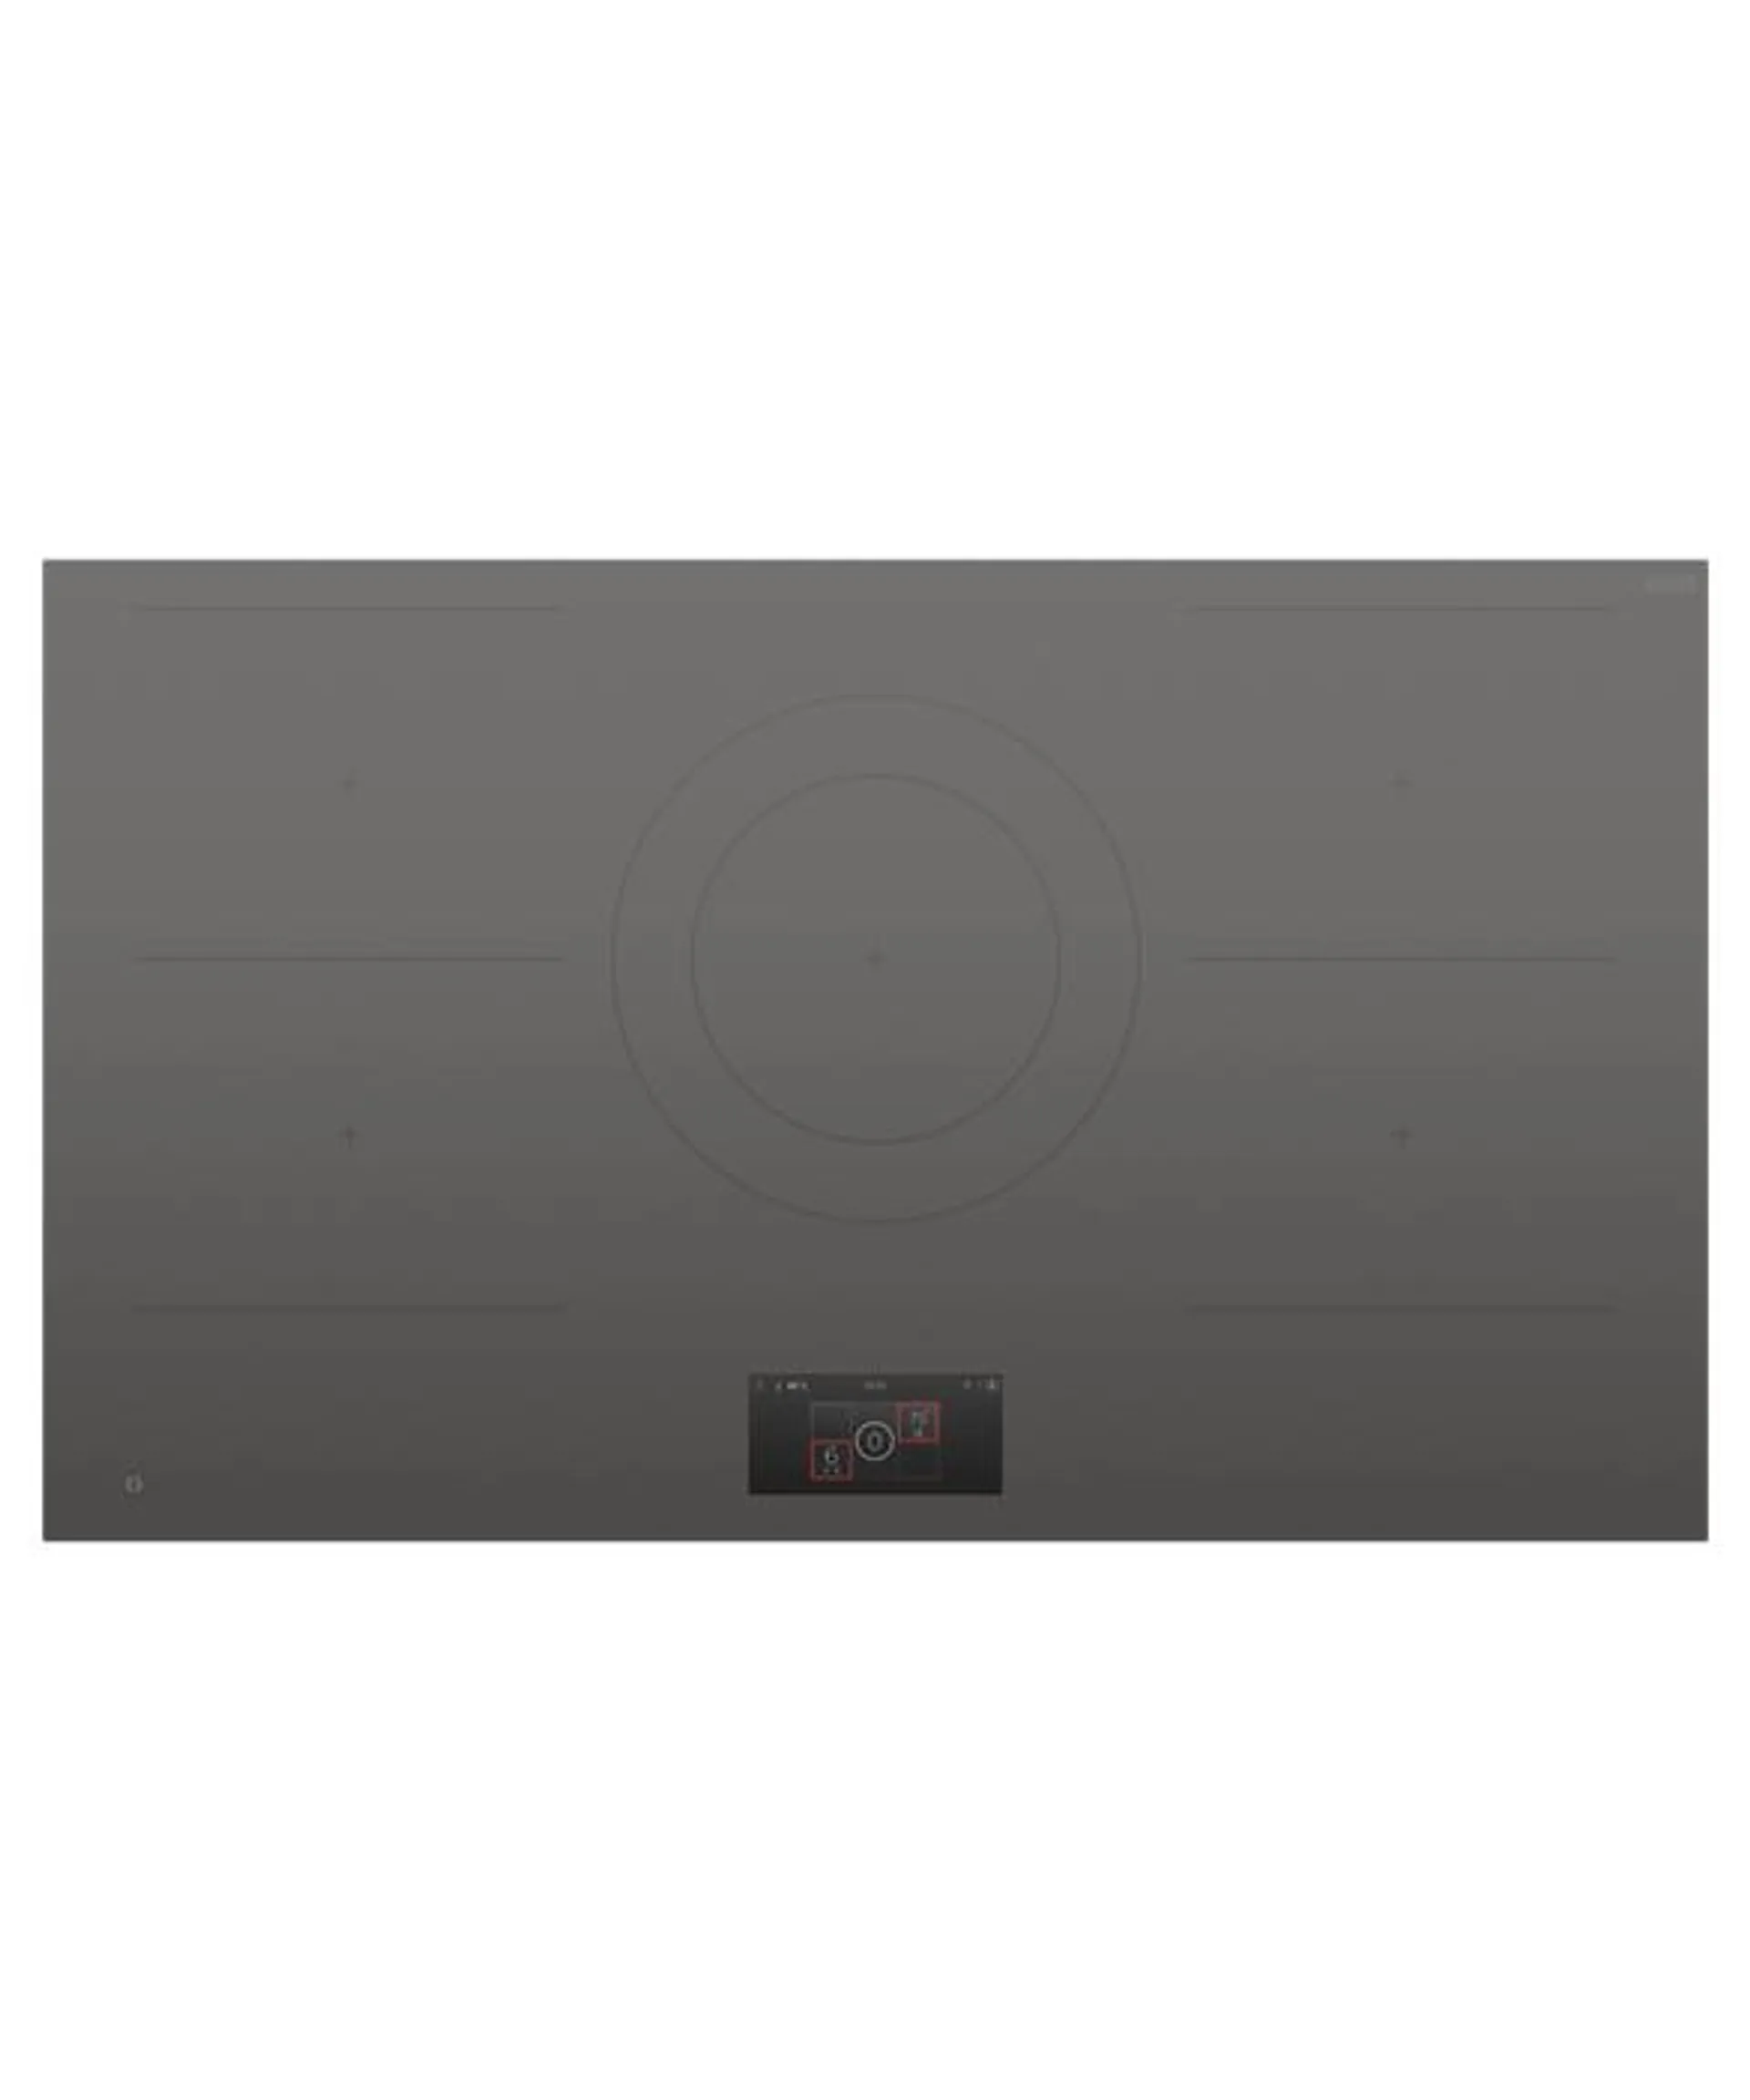 Primary Modular Induction Cooktop, 90cm, 5 Zones with SmartZone